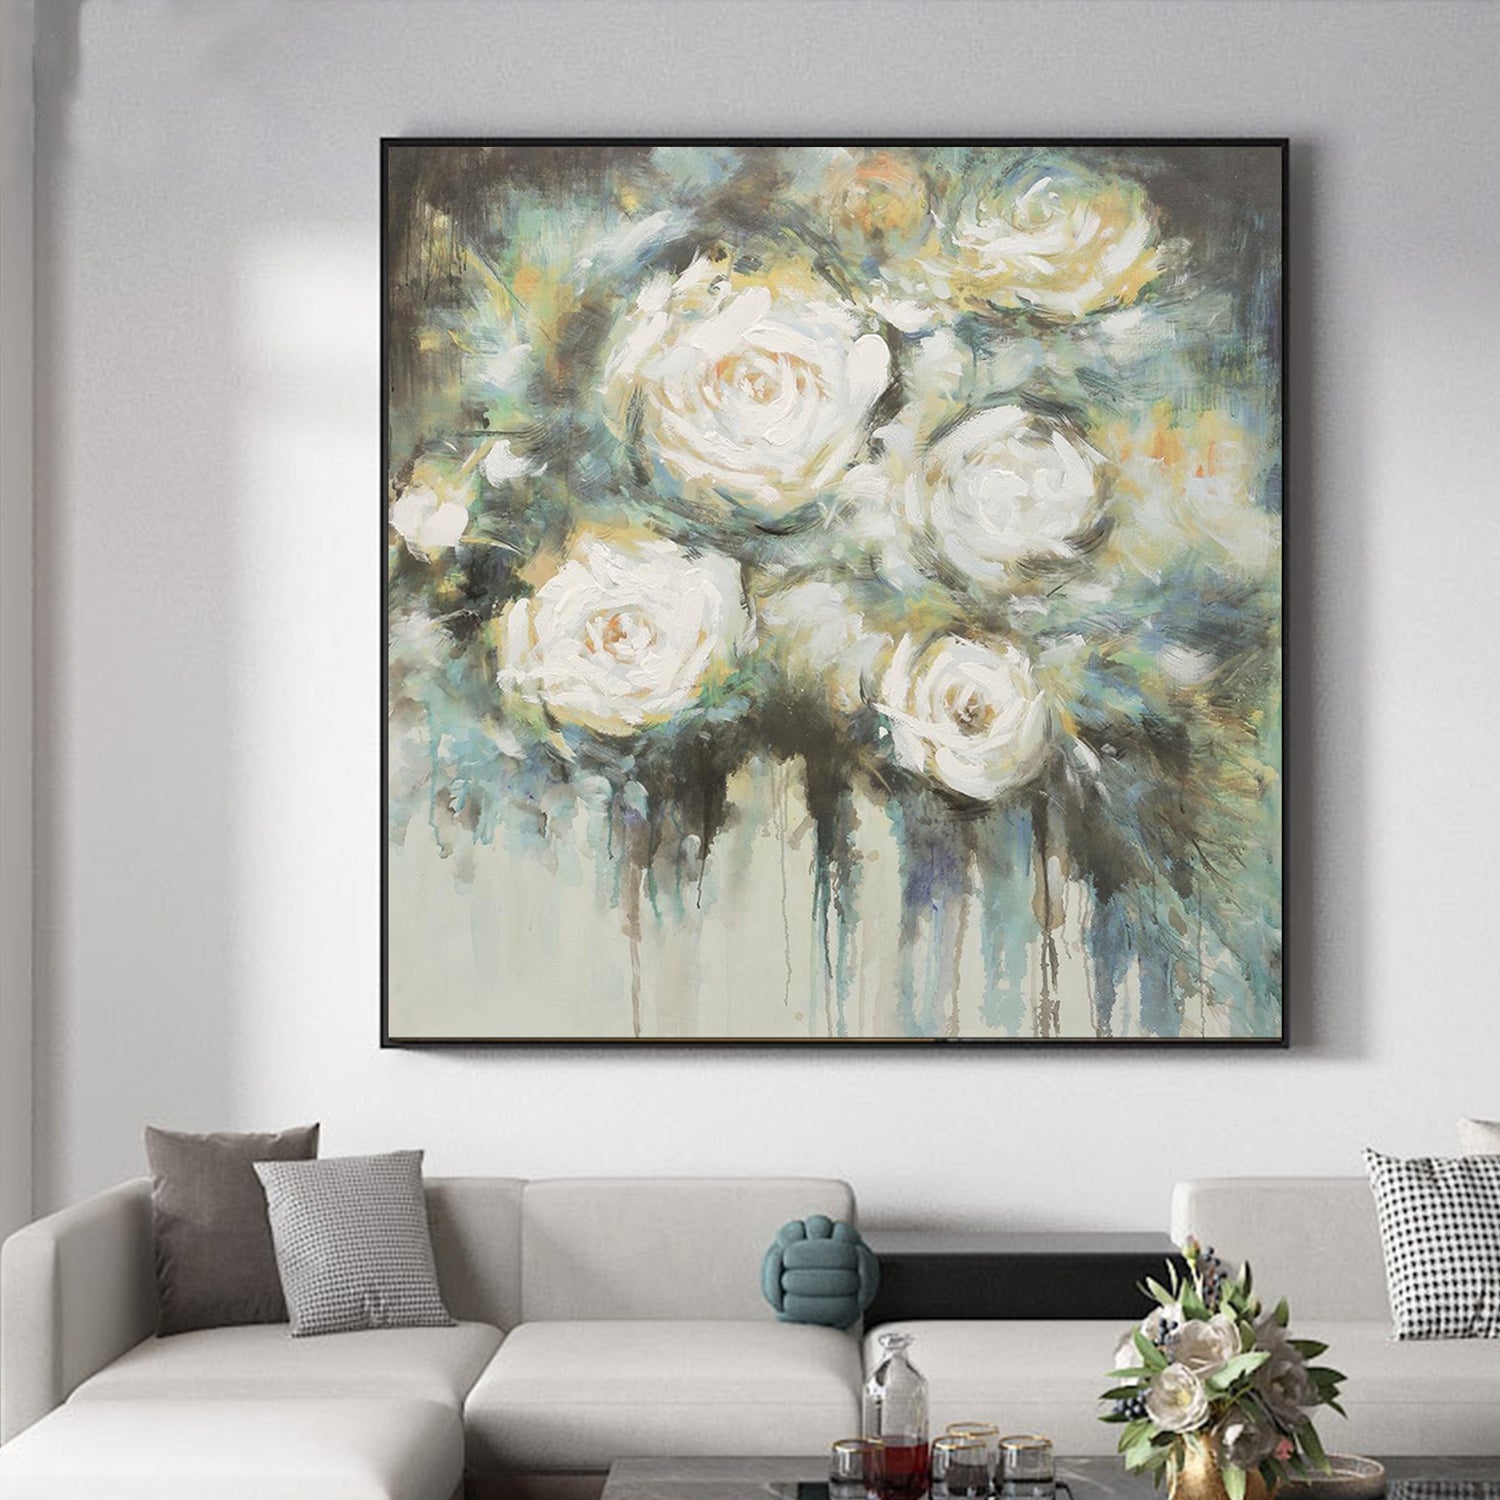 Buy Online Hand Painted Wall Art in Brisbane,abstract art,canvas painted,painting online